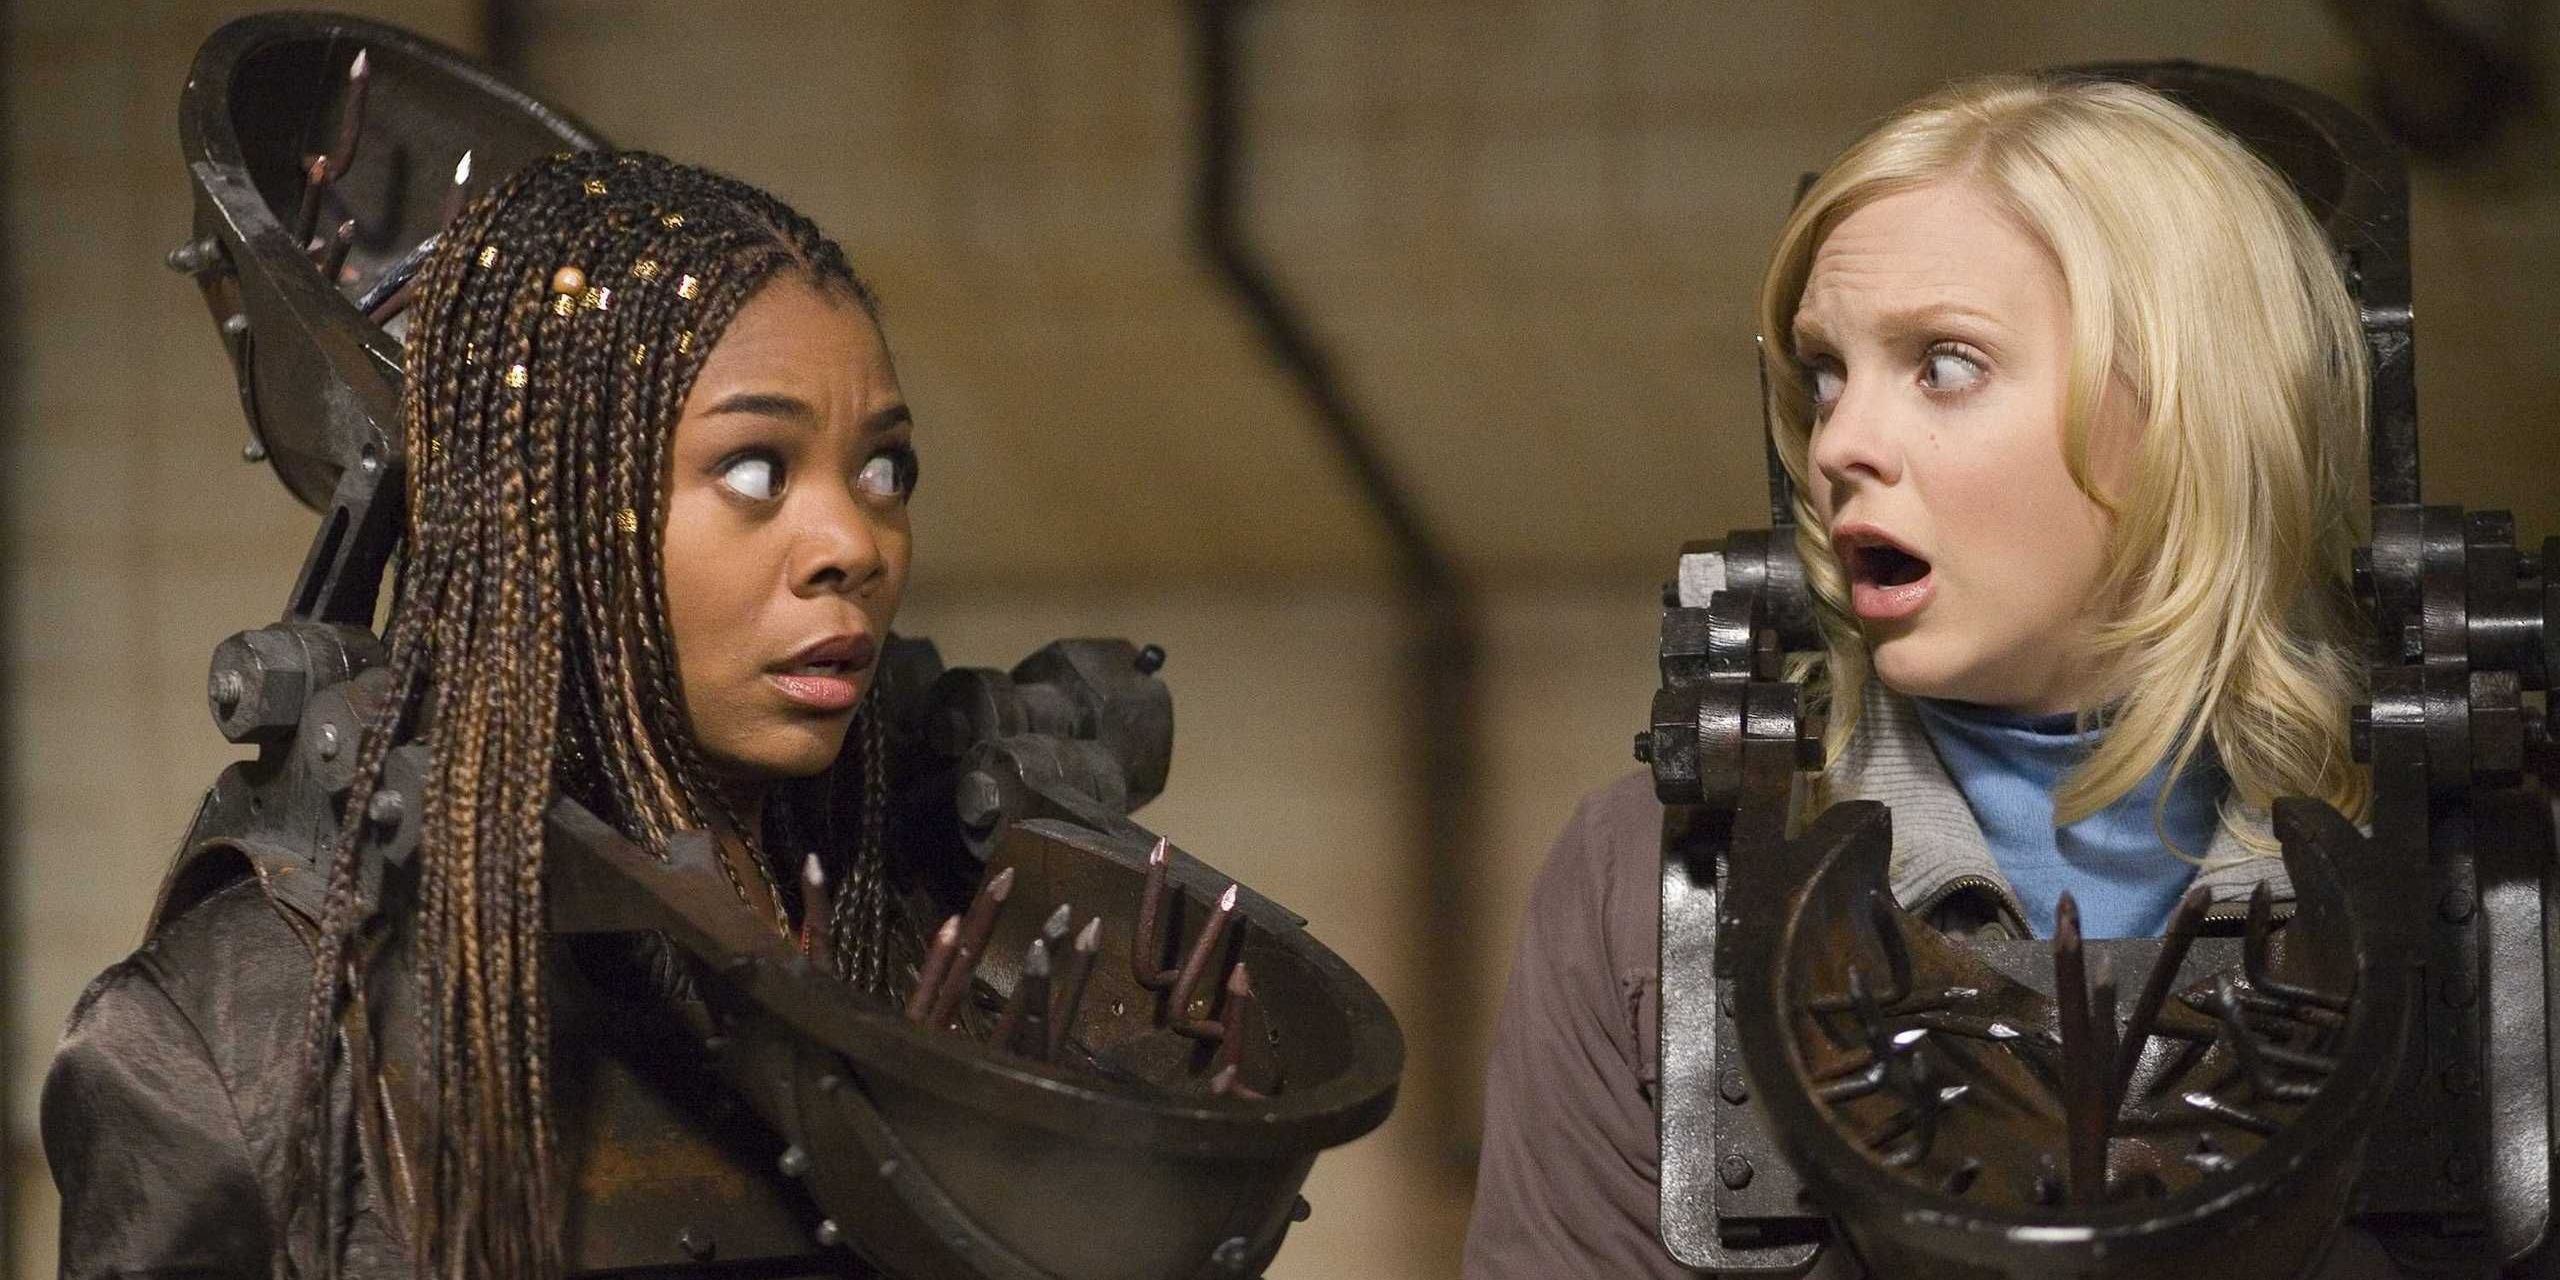 Brenda and Cindy wearing Saw-like traps on their necks and looking shocked in Scary Movie 4.